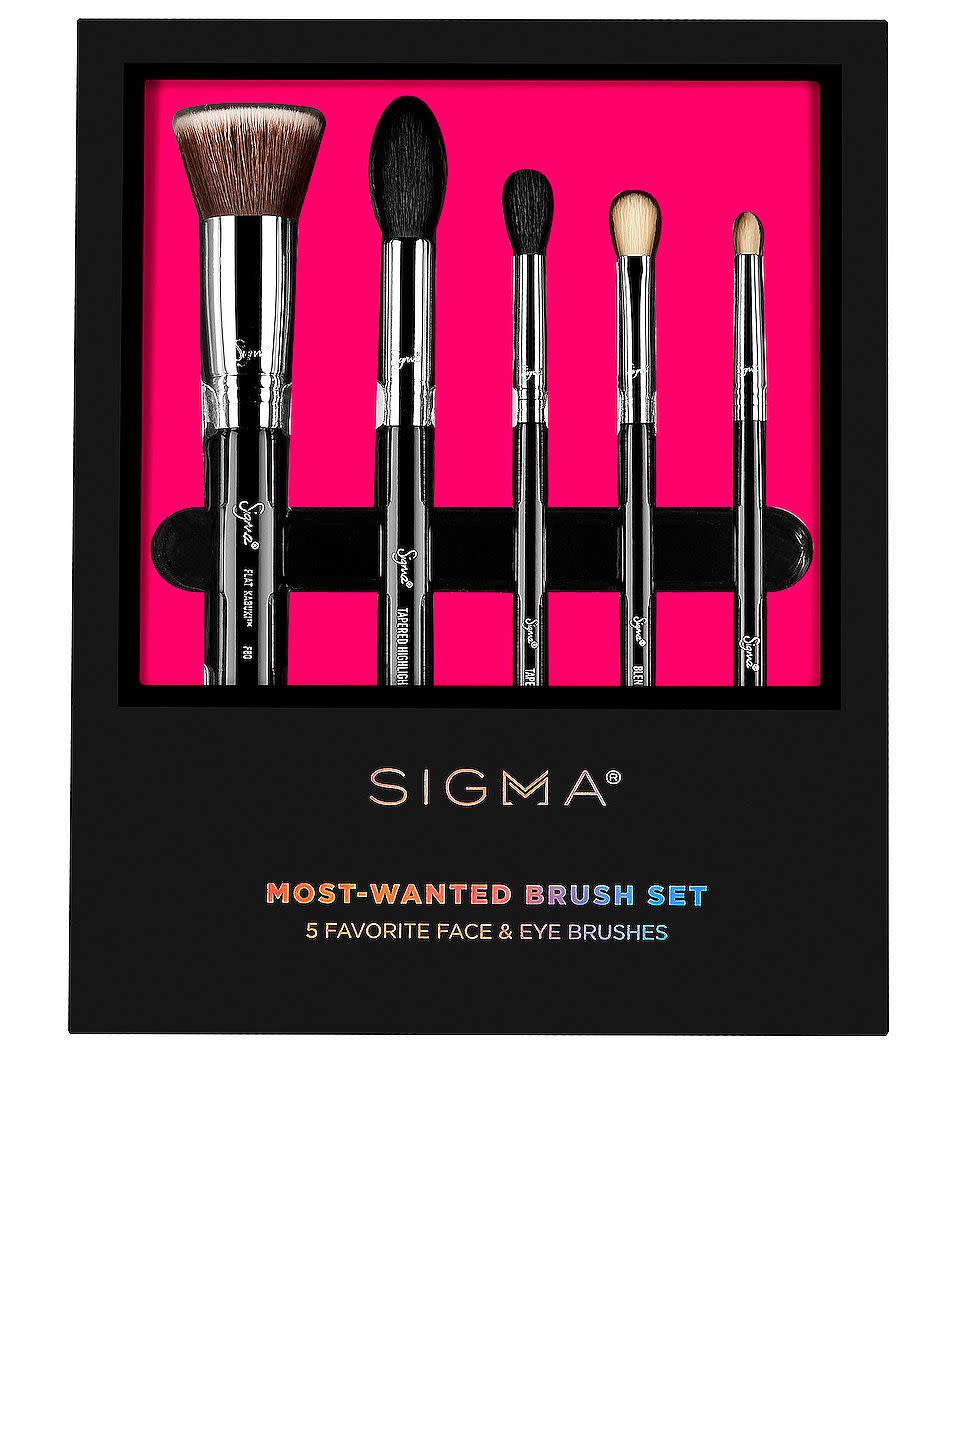 14) Most-Wanted Brush Set